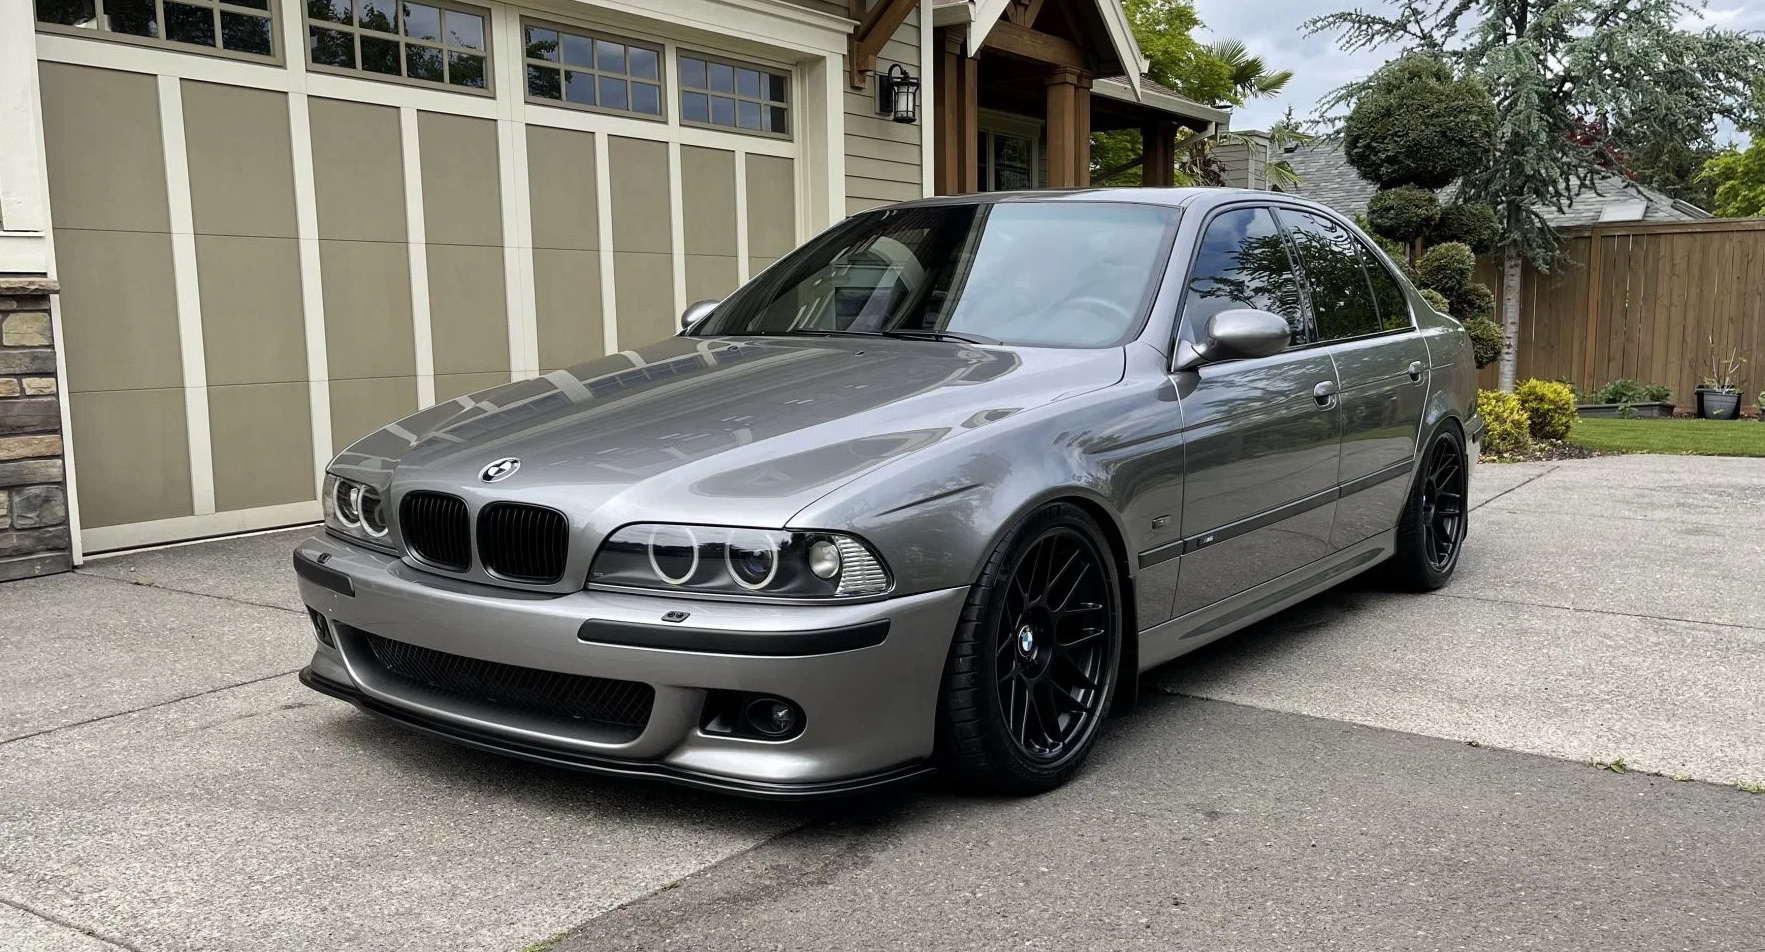 Tuned E39 BMW M5 Up for Grabs With Several Awesome Interior and